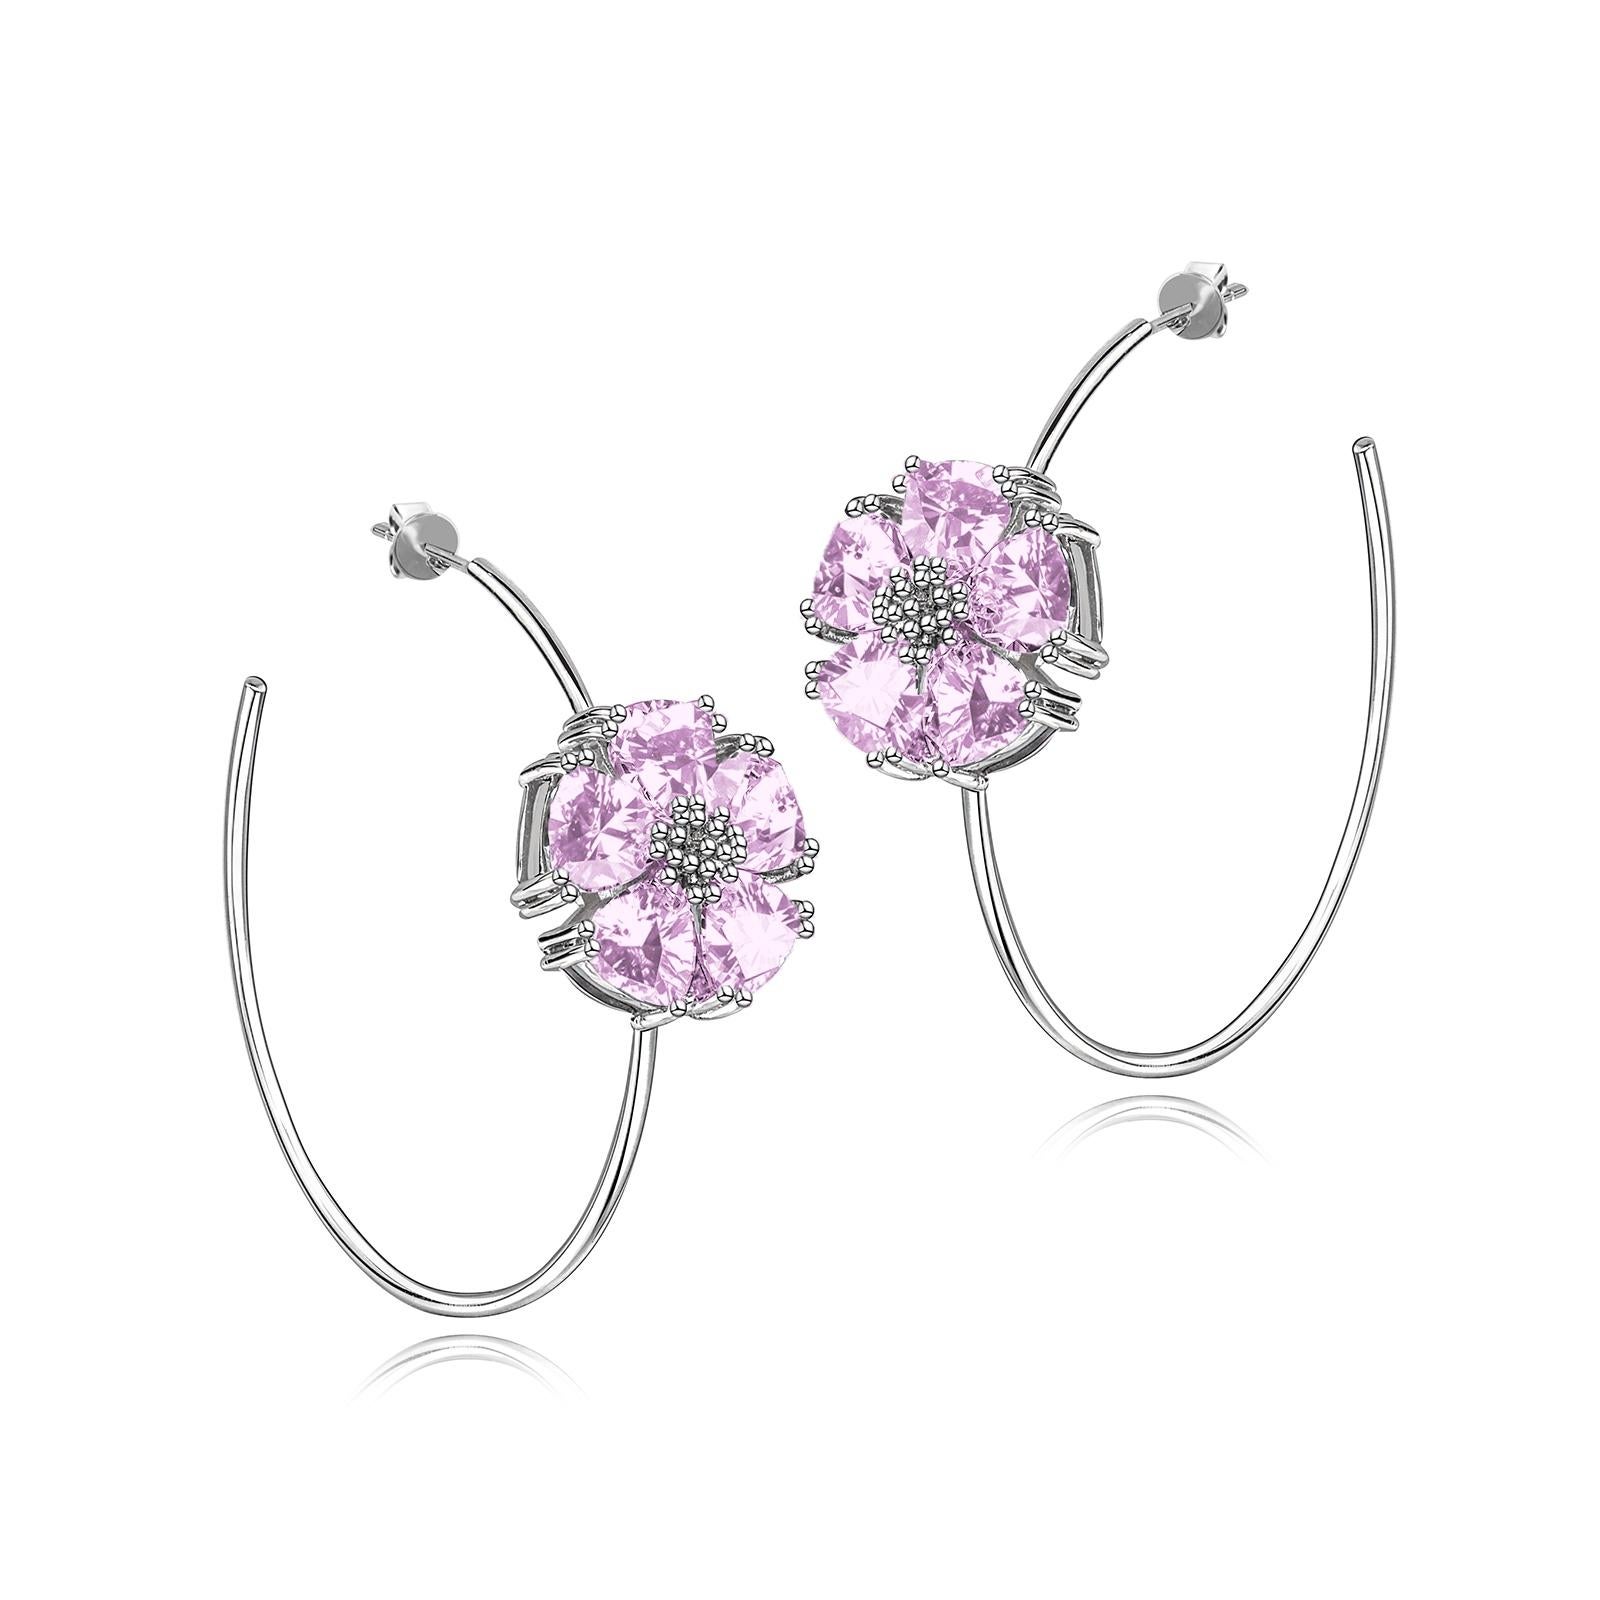 Designed in NYC

.925 Sterling Silver 2 x 20 mm Amethyst Blossom Stone Open Hoops. No matter the season, allow natural beauty to surround you wherever you go. Blossom stone open hoops: 

Sterling silver 
High-polish finish 
Light-weight 
2 x 20 mm